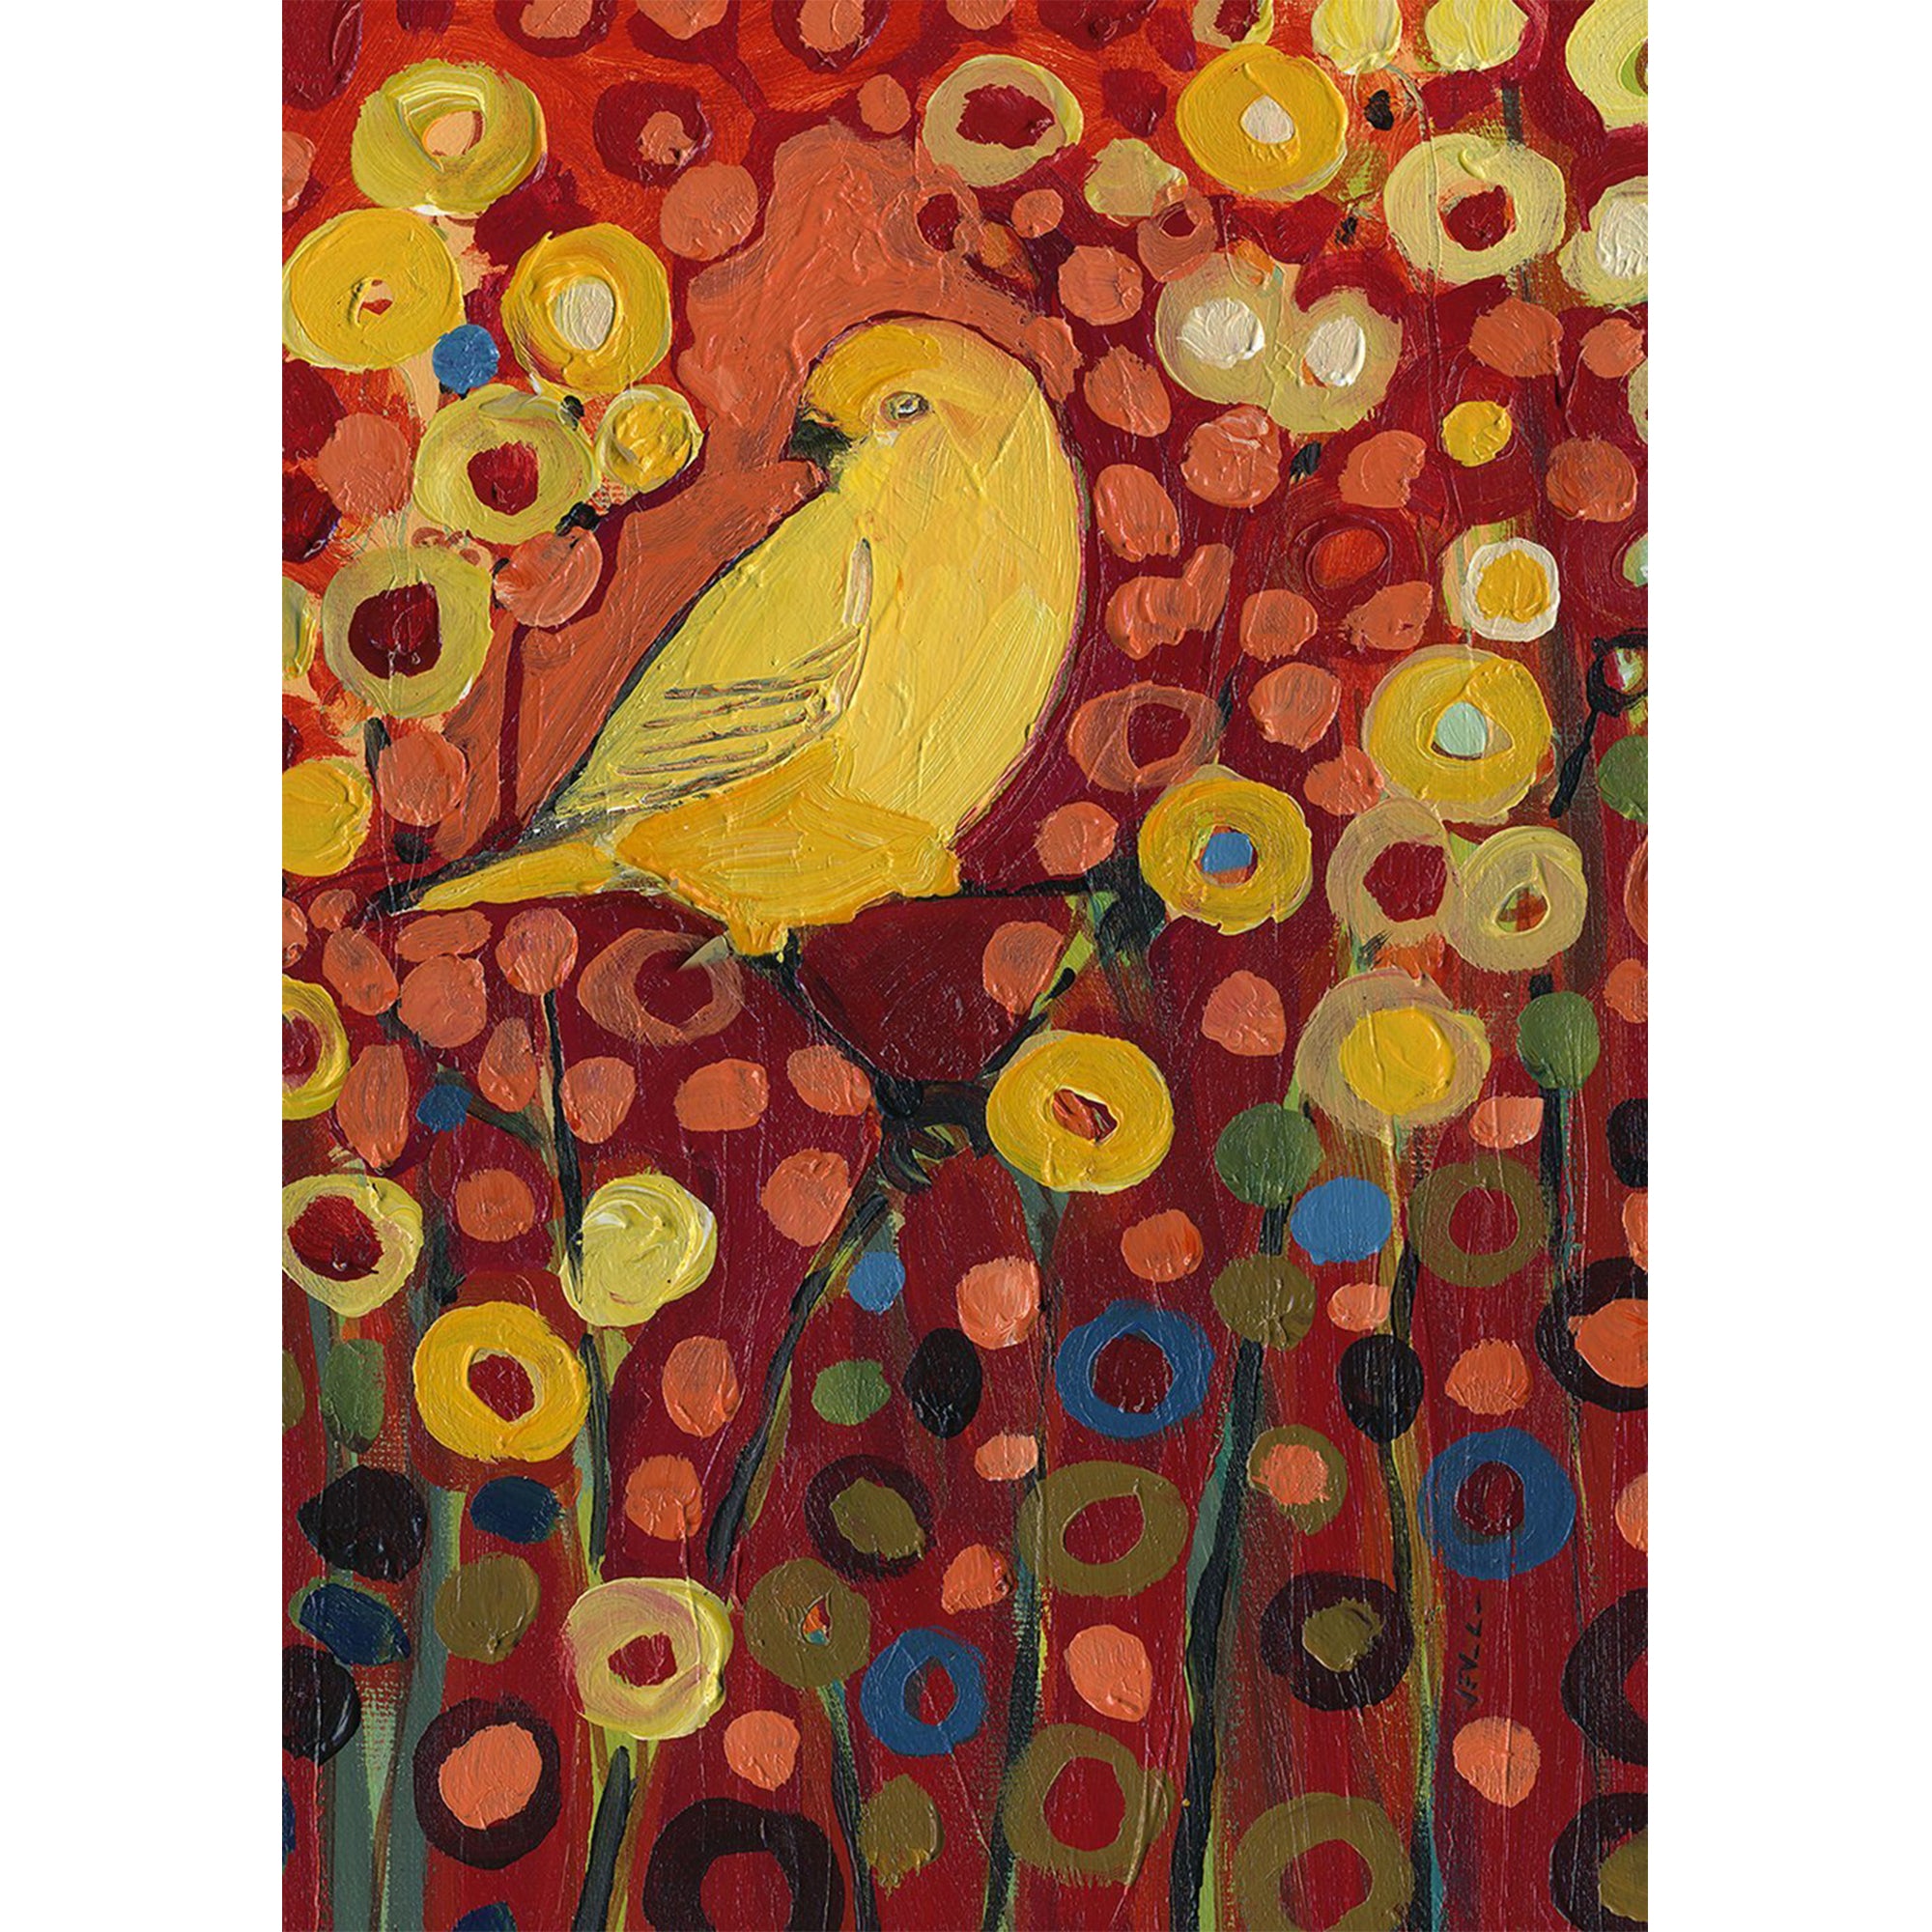 Toland Canary Field Of Flowers Garden Flag